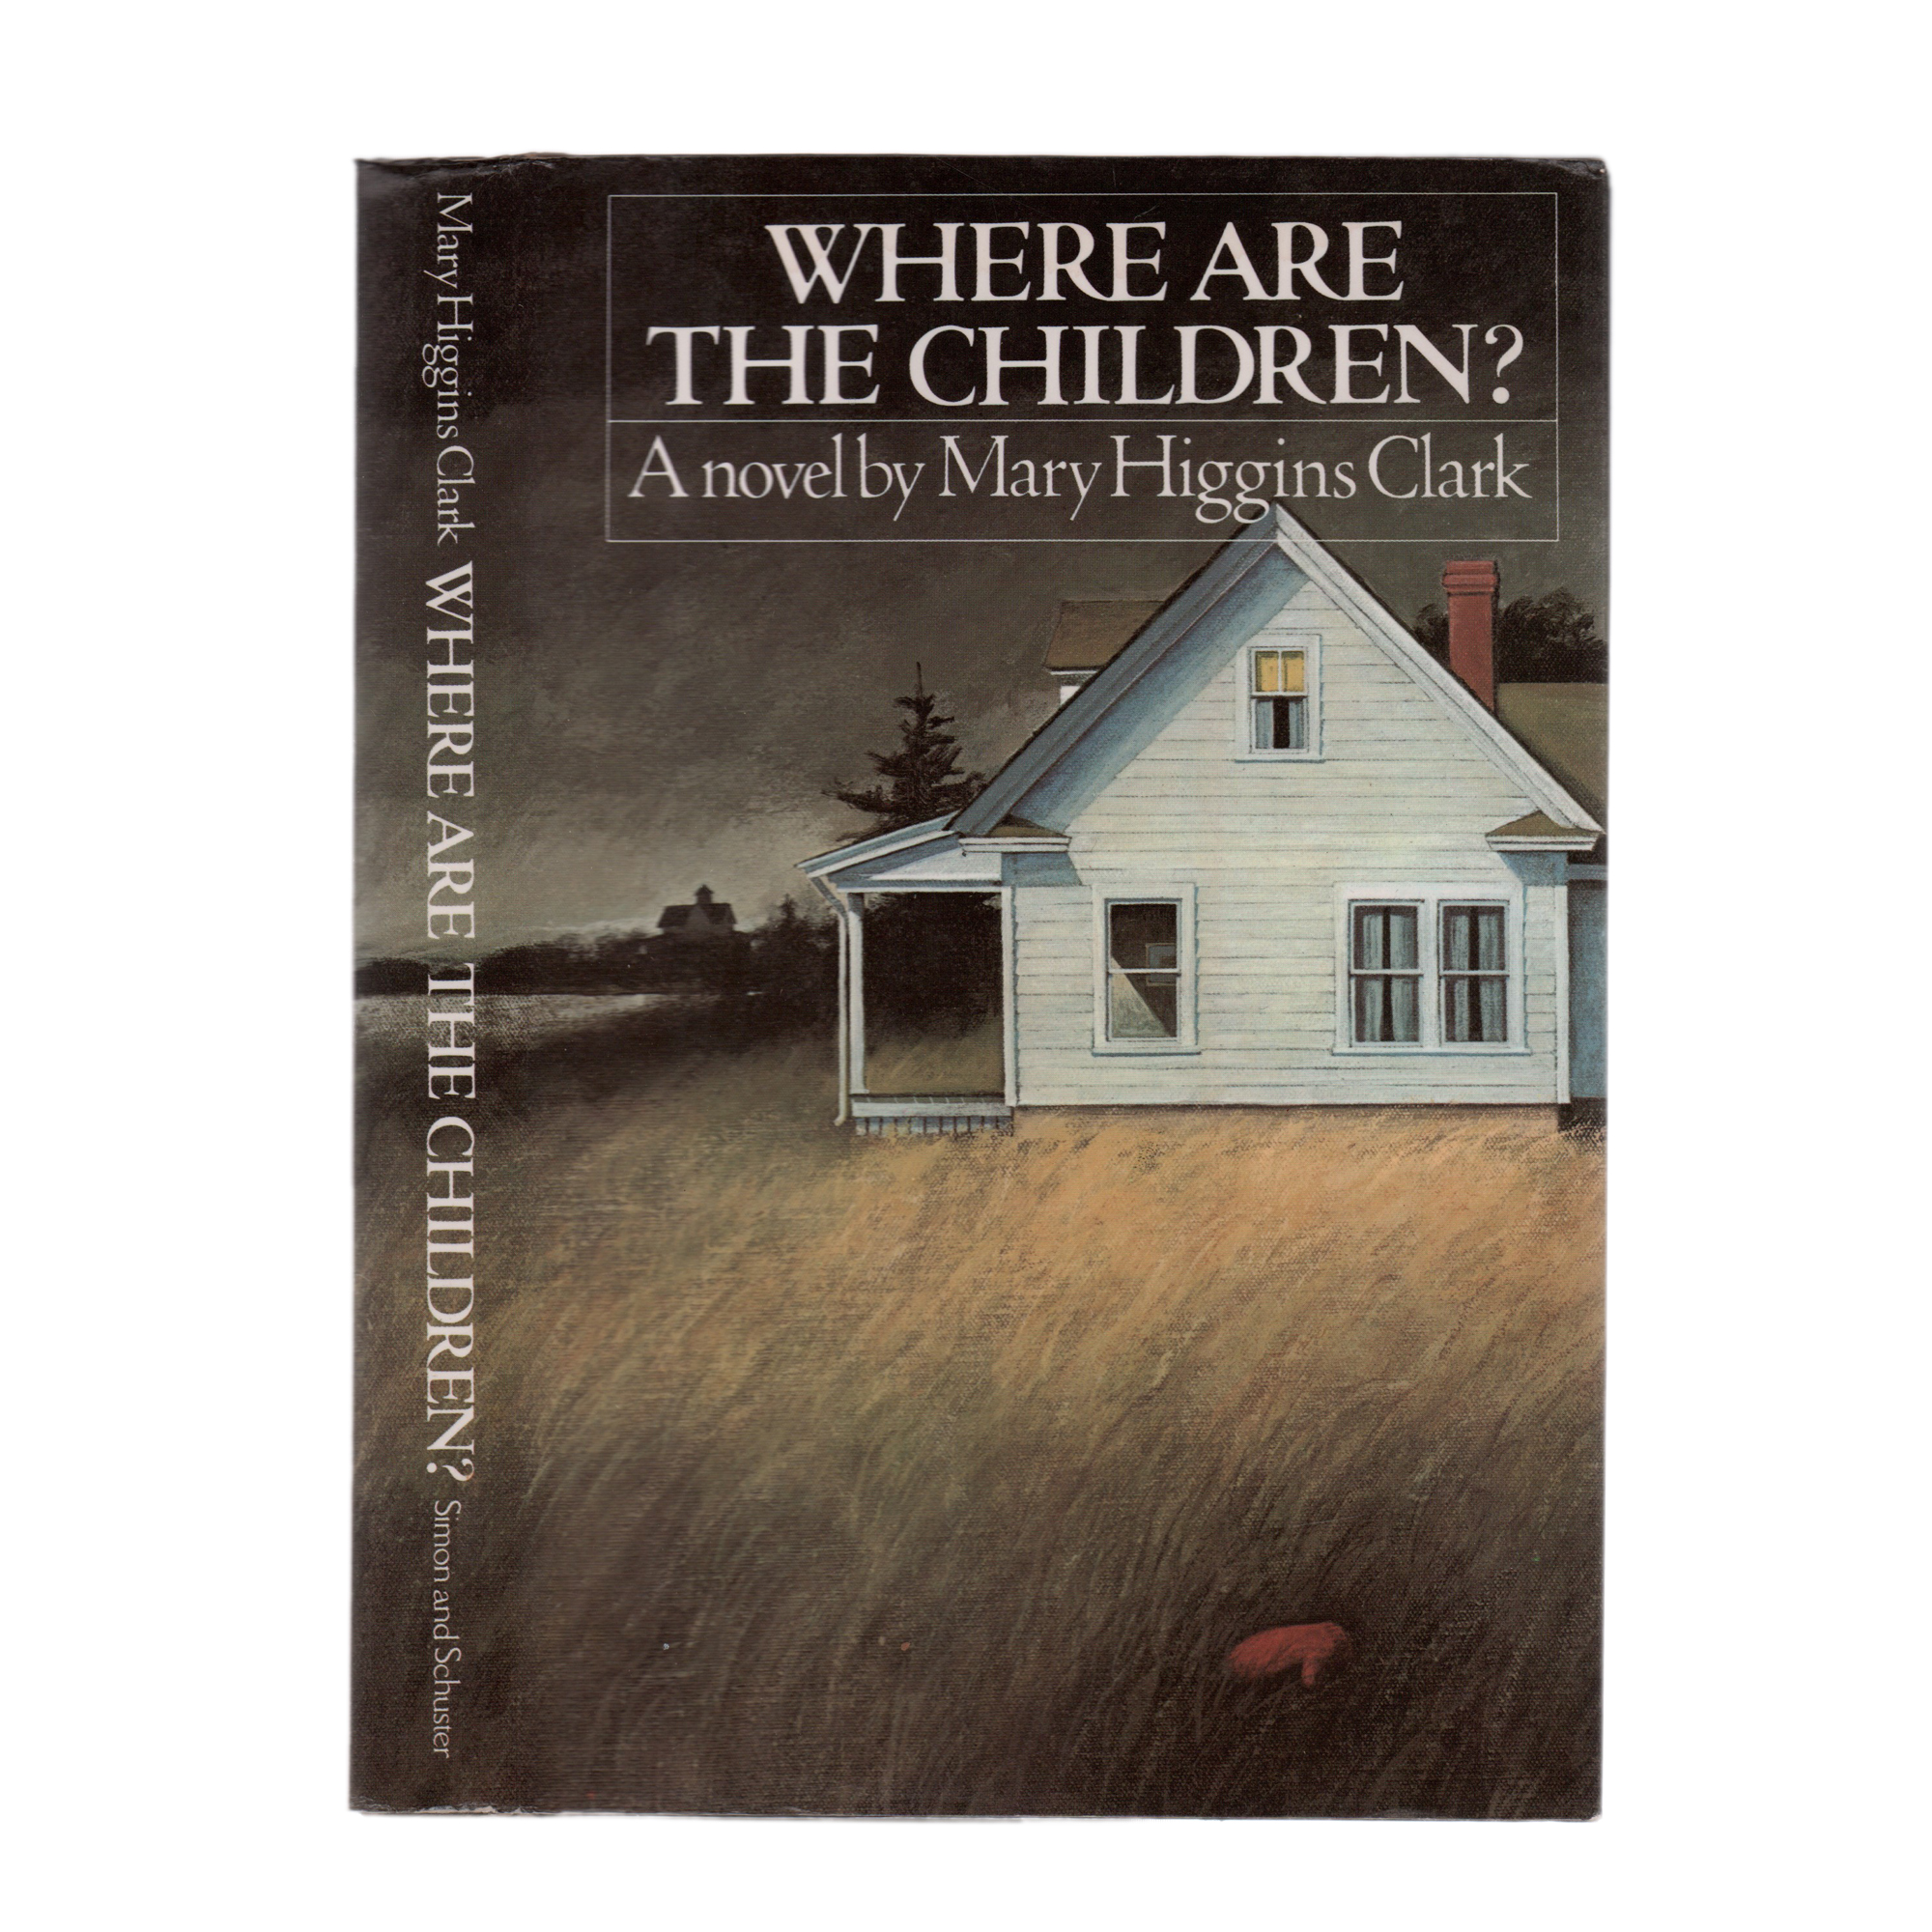 Where Are the Children? by Mary Higgins Clark (1999, Hardcover) for sale online | eBay